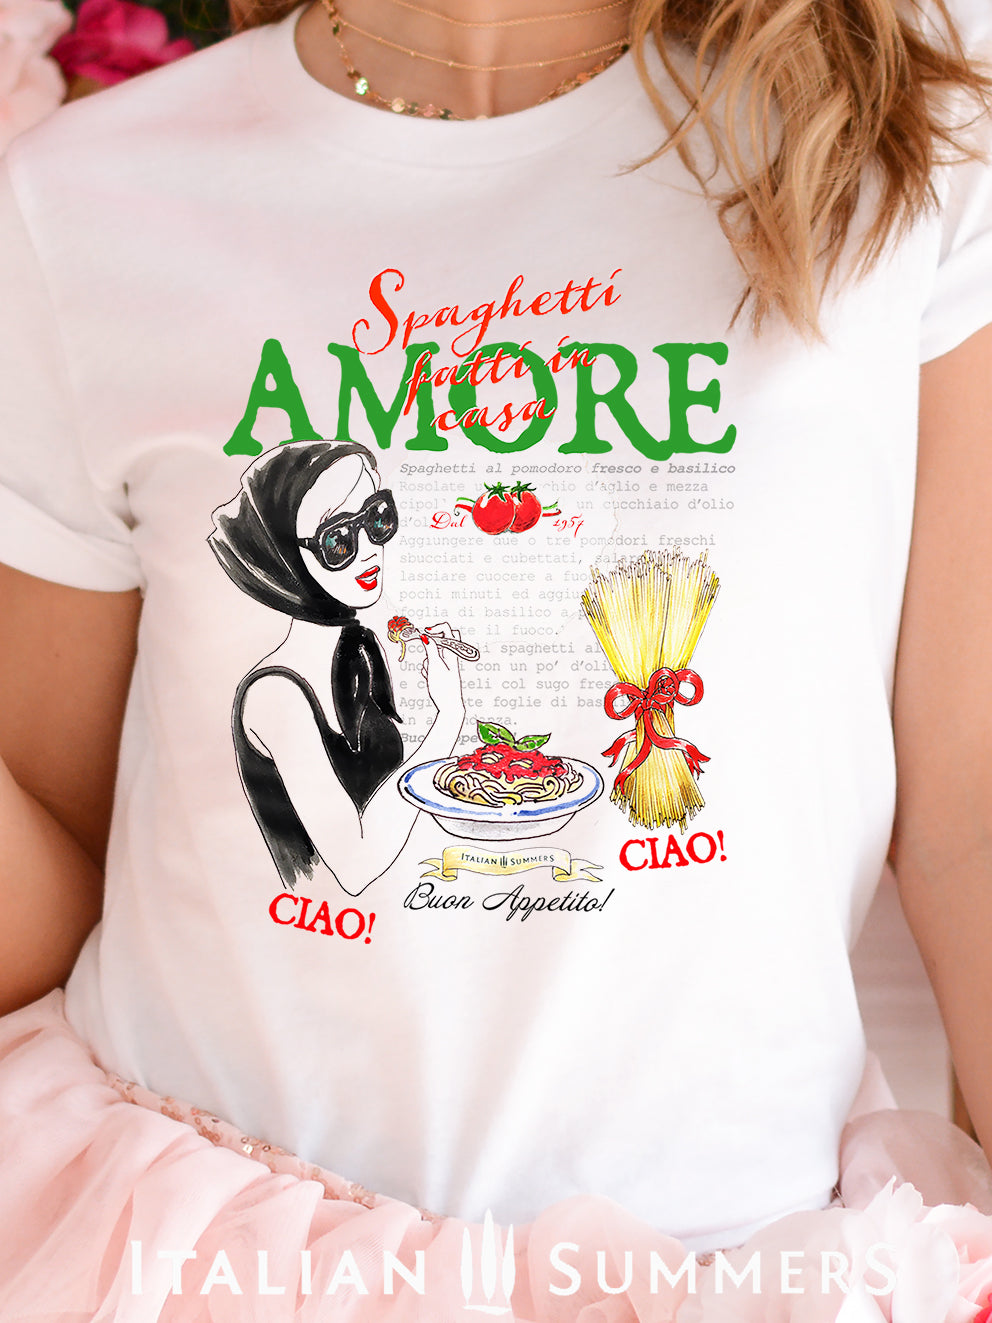 Italy-inspired  Italian food-inspired T shirt designed by Italian Summers. We included the drawing of a lady eating spaghetti while wearing a fashionable pair of glasses and the text " Spaghetti fatti in Casa- Amore" also features a recipe for 'spaghetti al pomodoro e basilico' text in the backround.